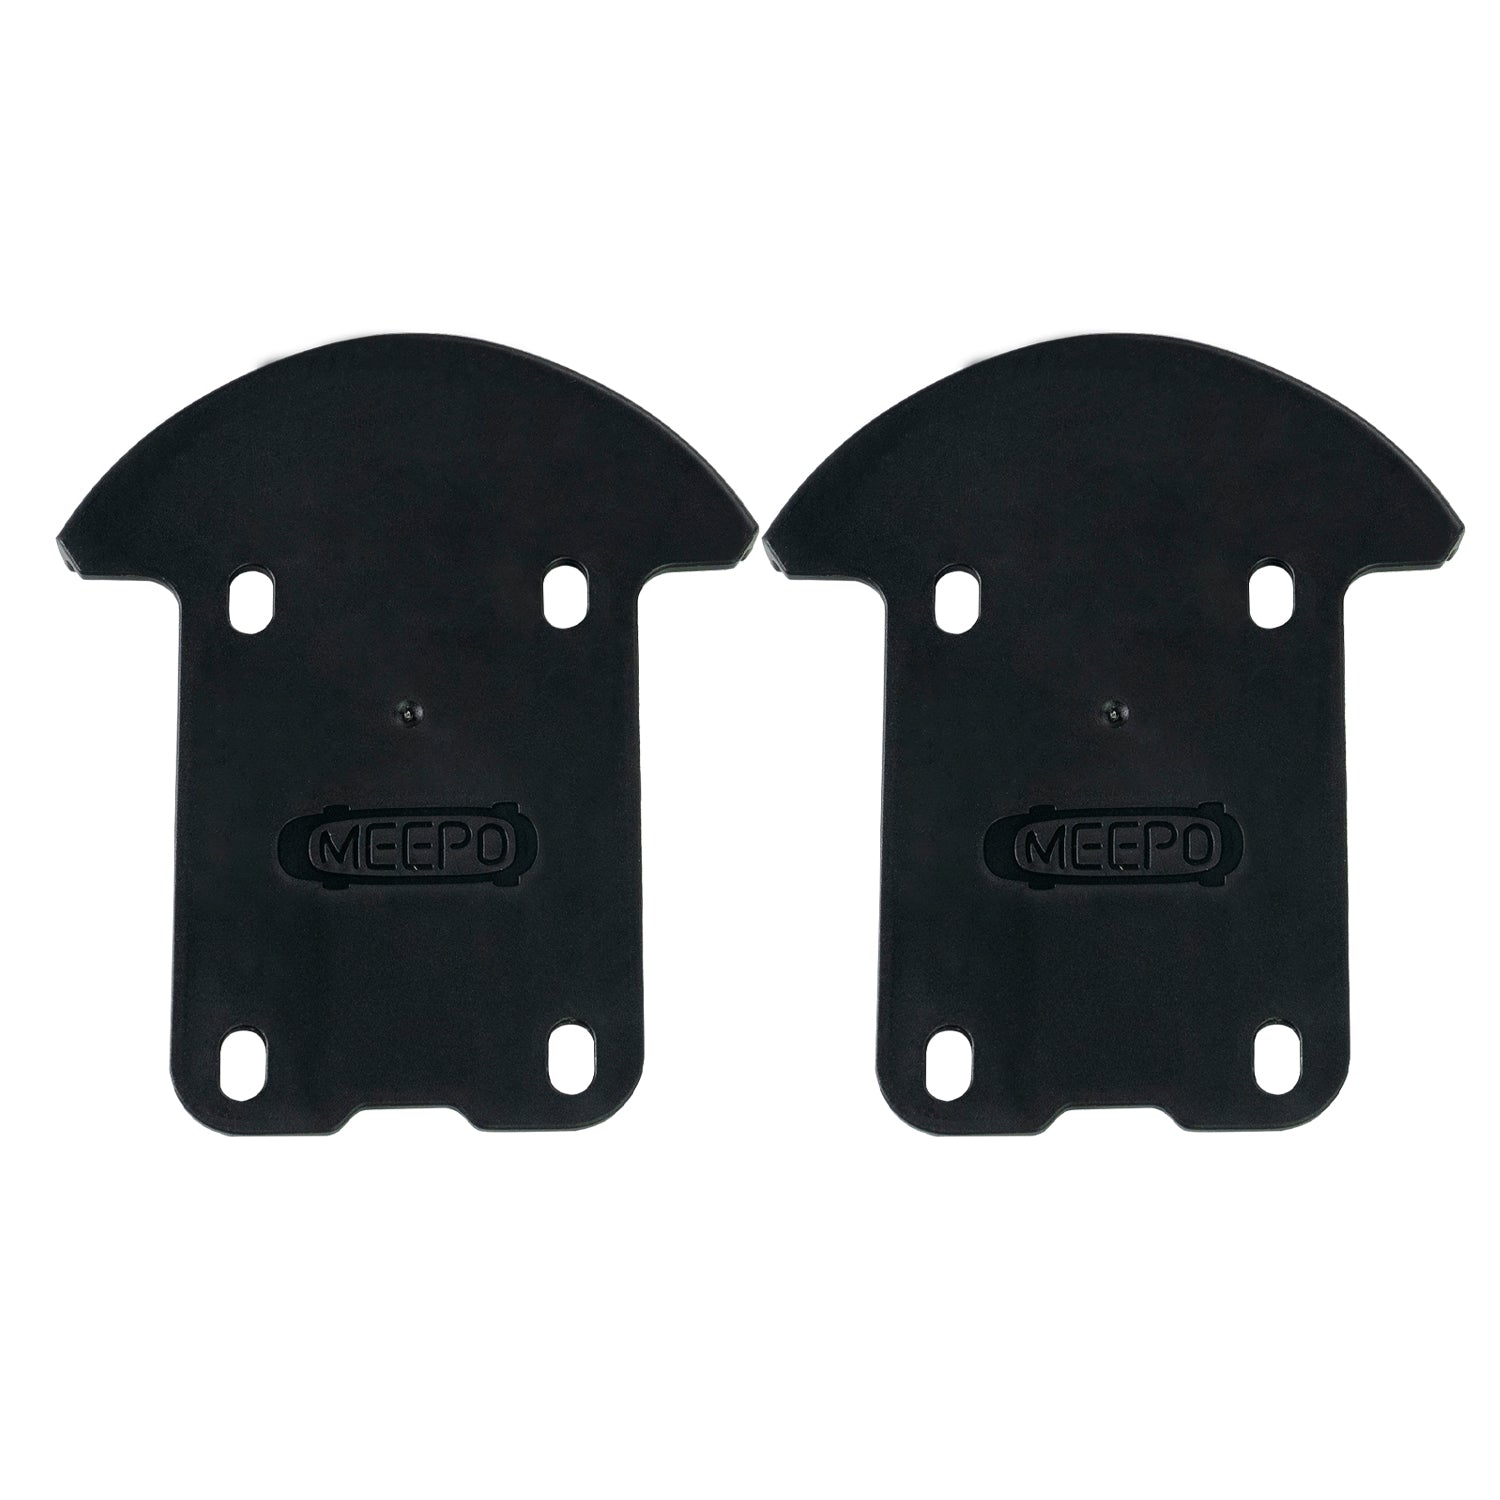 Electric Skateboard Anti-collision Pads for Voyager / Envy / V5